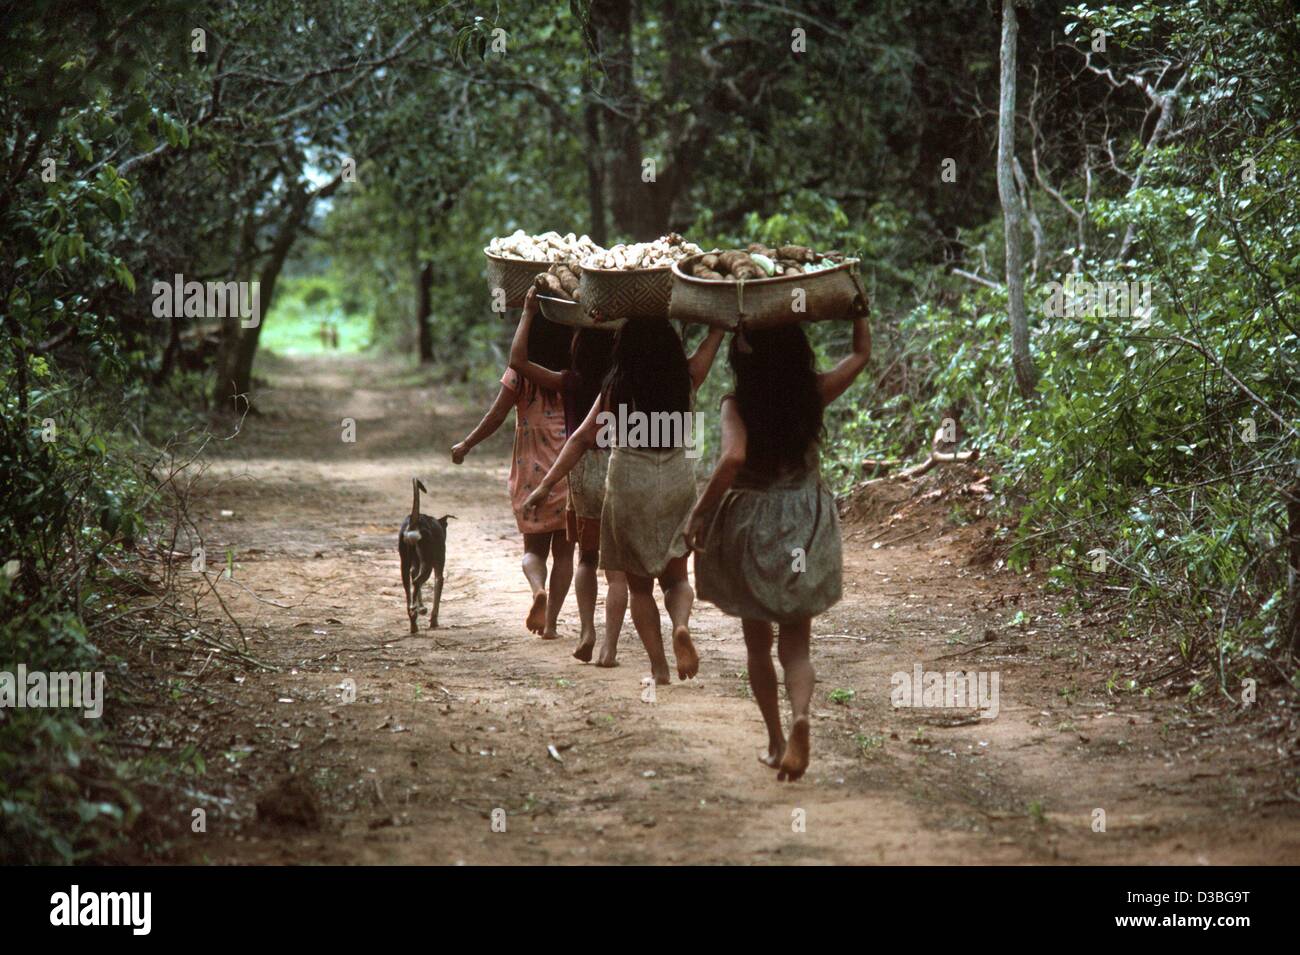 (dpa files) - Women of the Jawalapiti tribe carry baskets full of manioc to their village, in the Xingu National Park in Brazil, 1976. The staple food of the Native Amazon Indians is manioc and the main source of protein is fish. Many of the hunting and agricultural skills of the original Indian tri Stock Photo